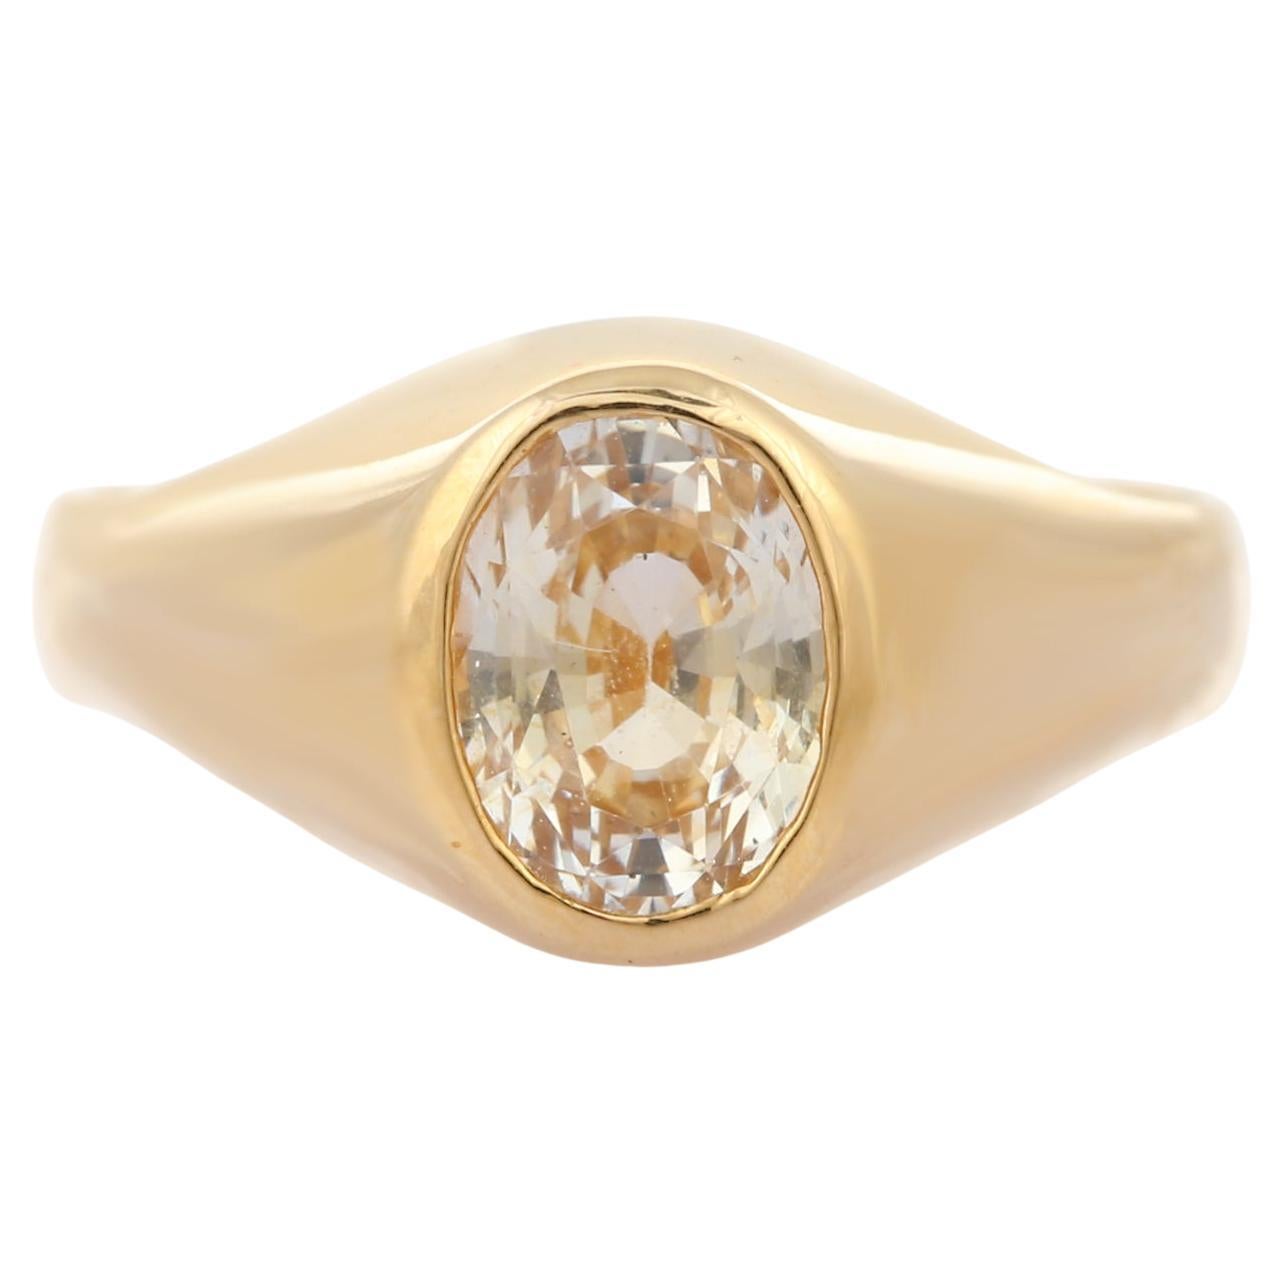 For Sale:  2.19 Carat Oval Cut Yellow Sapphire Solitaire Ring in 18 Karat Yellow Gold